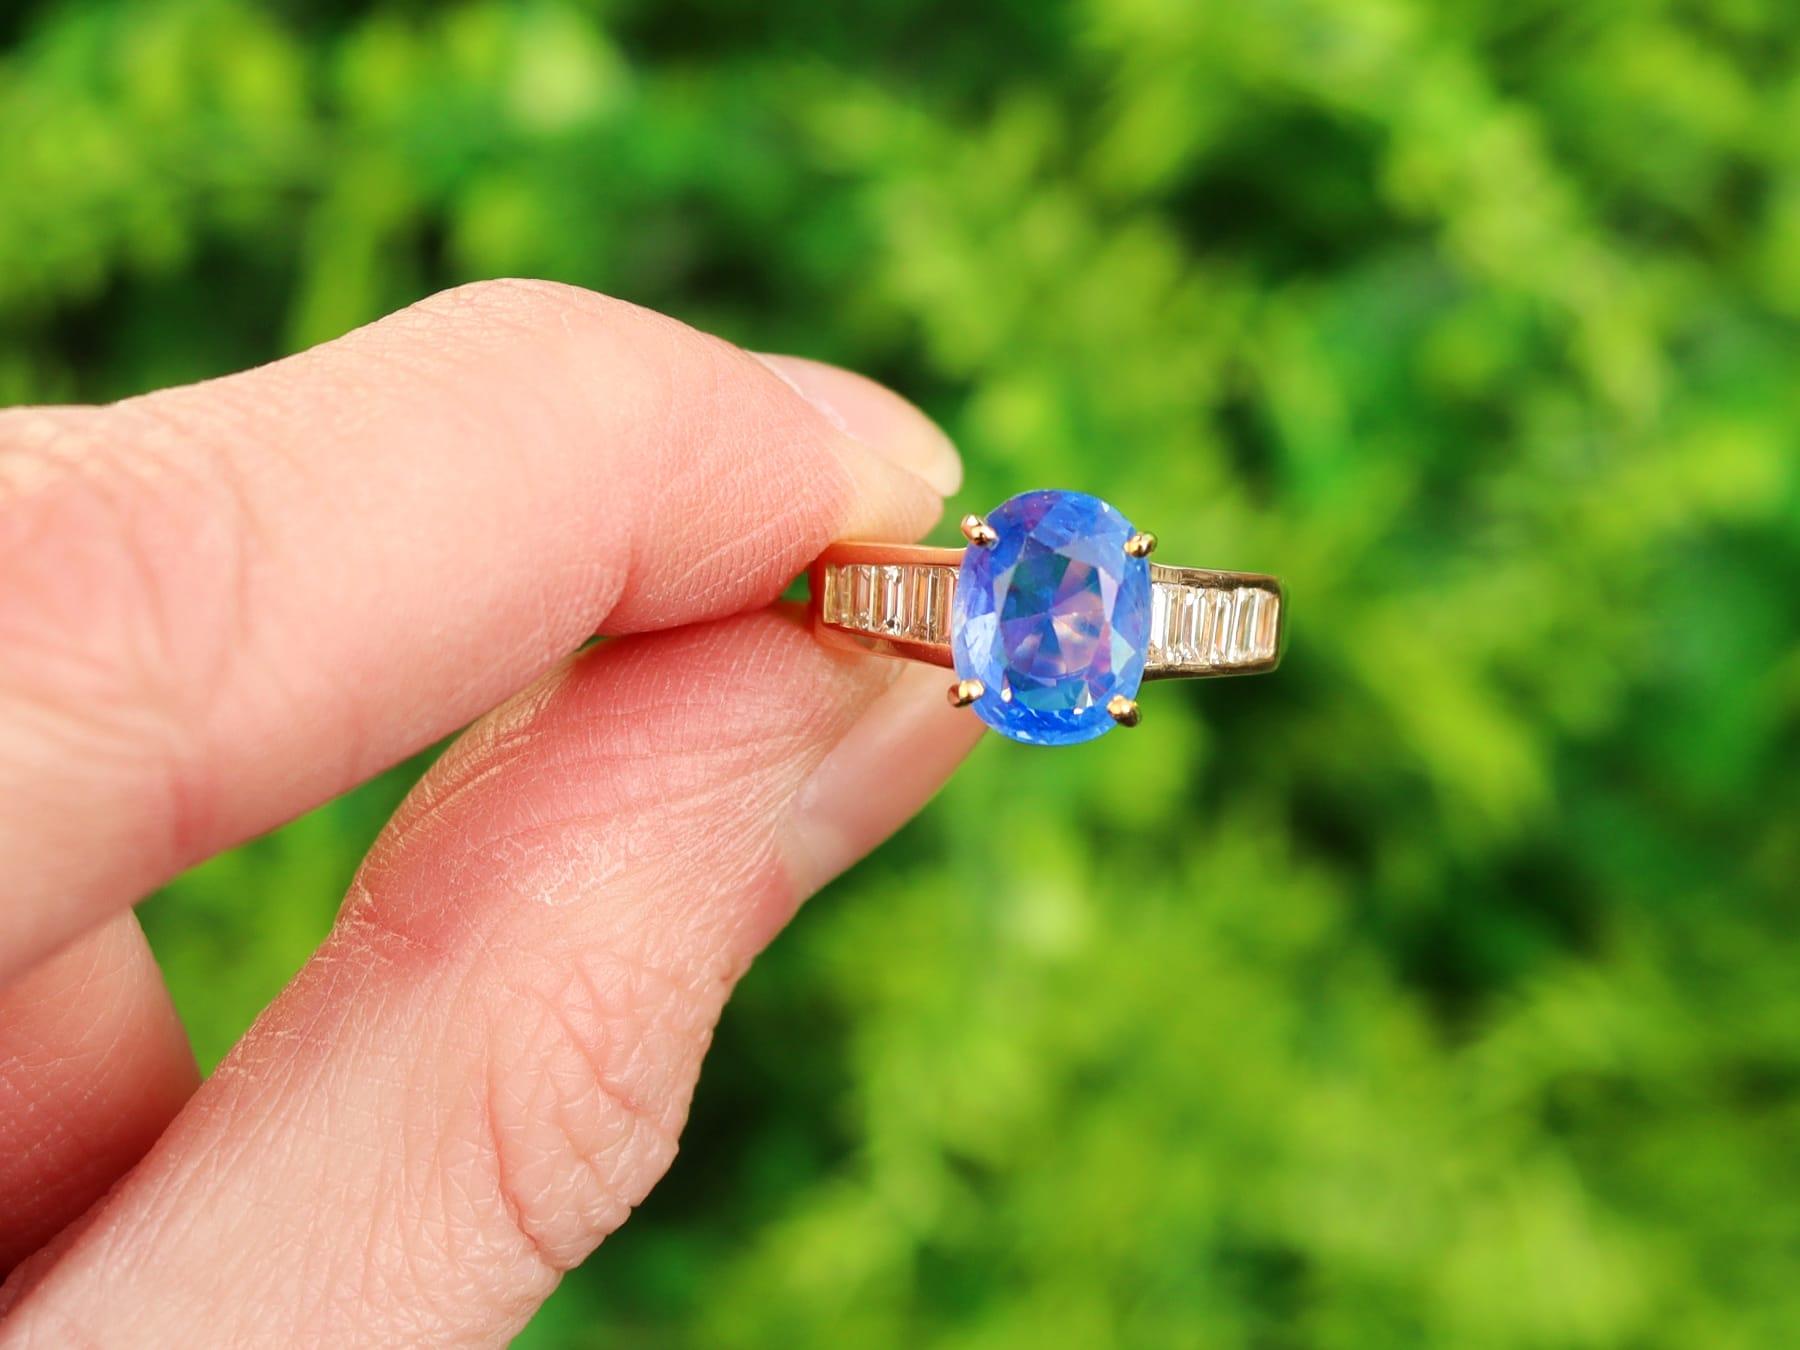 A stunning vintage 3.52 carat unheated Ceylon sapphire and 0.60 carat diamond, 18 carat yellow gold dress ring; part of our diverse gemstone jewellery collections

This stunning, fine and impressive vintage blue sapphire and diamond ring has been